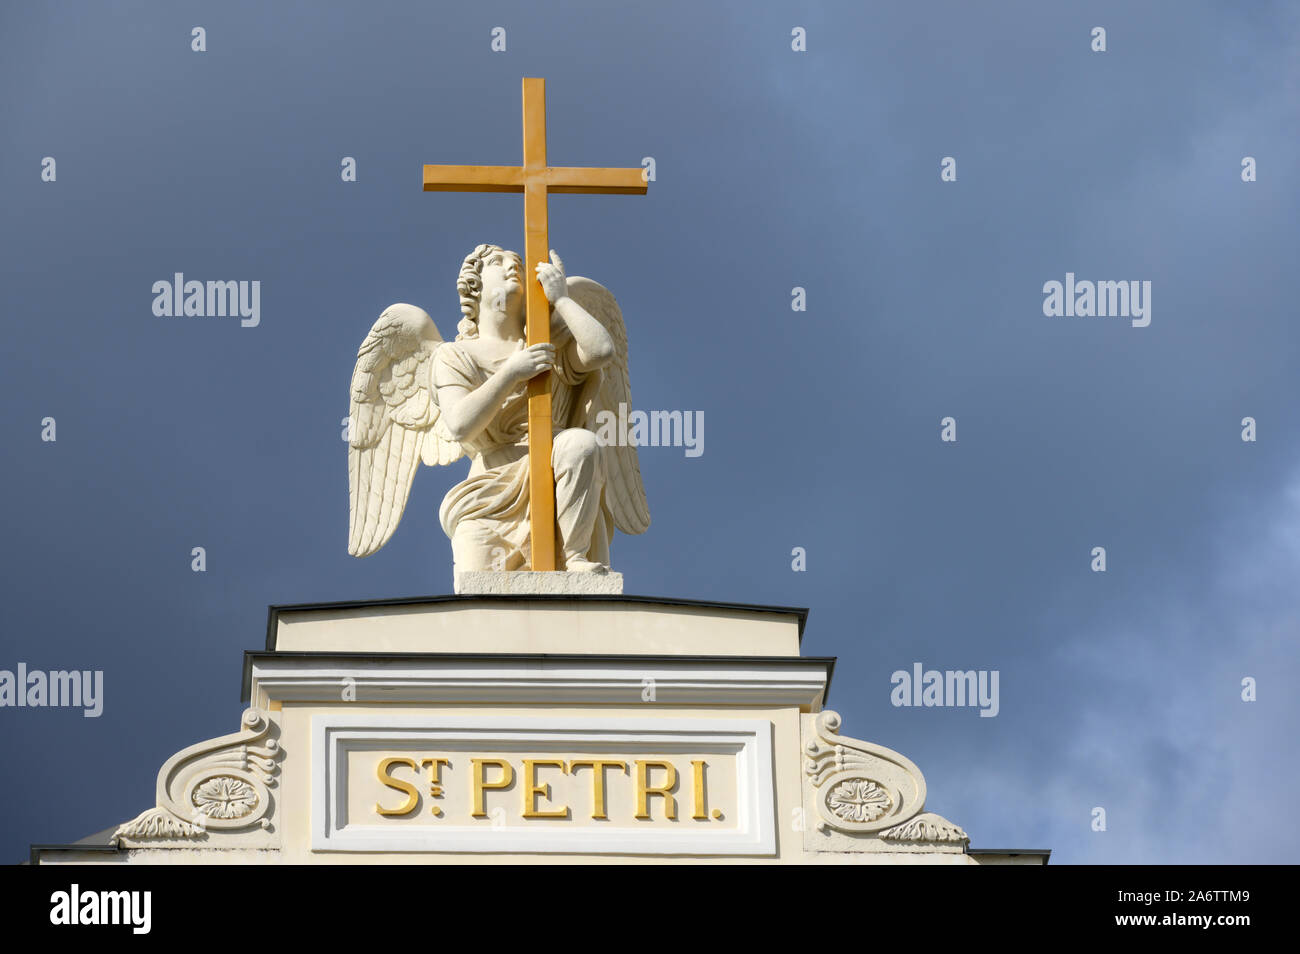 St. Petersburg, Russia - July 10, 2019: Statue of angel on the top of Lutheran Church of Saint Peter and Saint Paul. Stock Photo